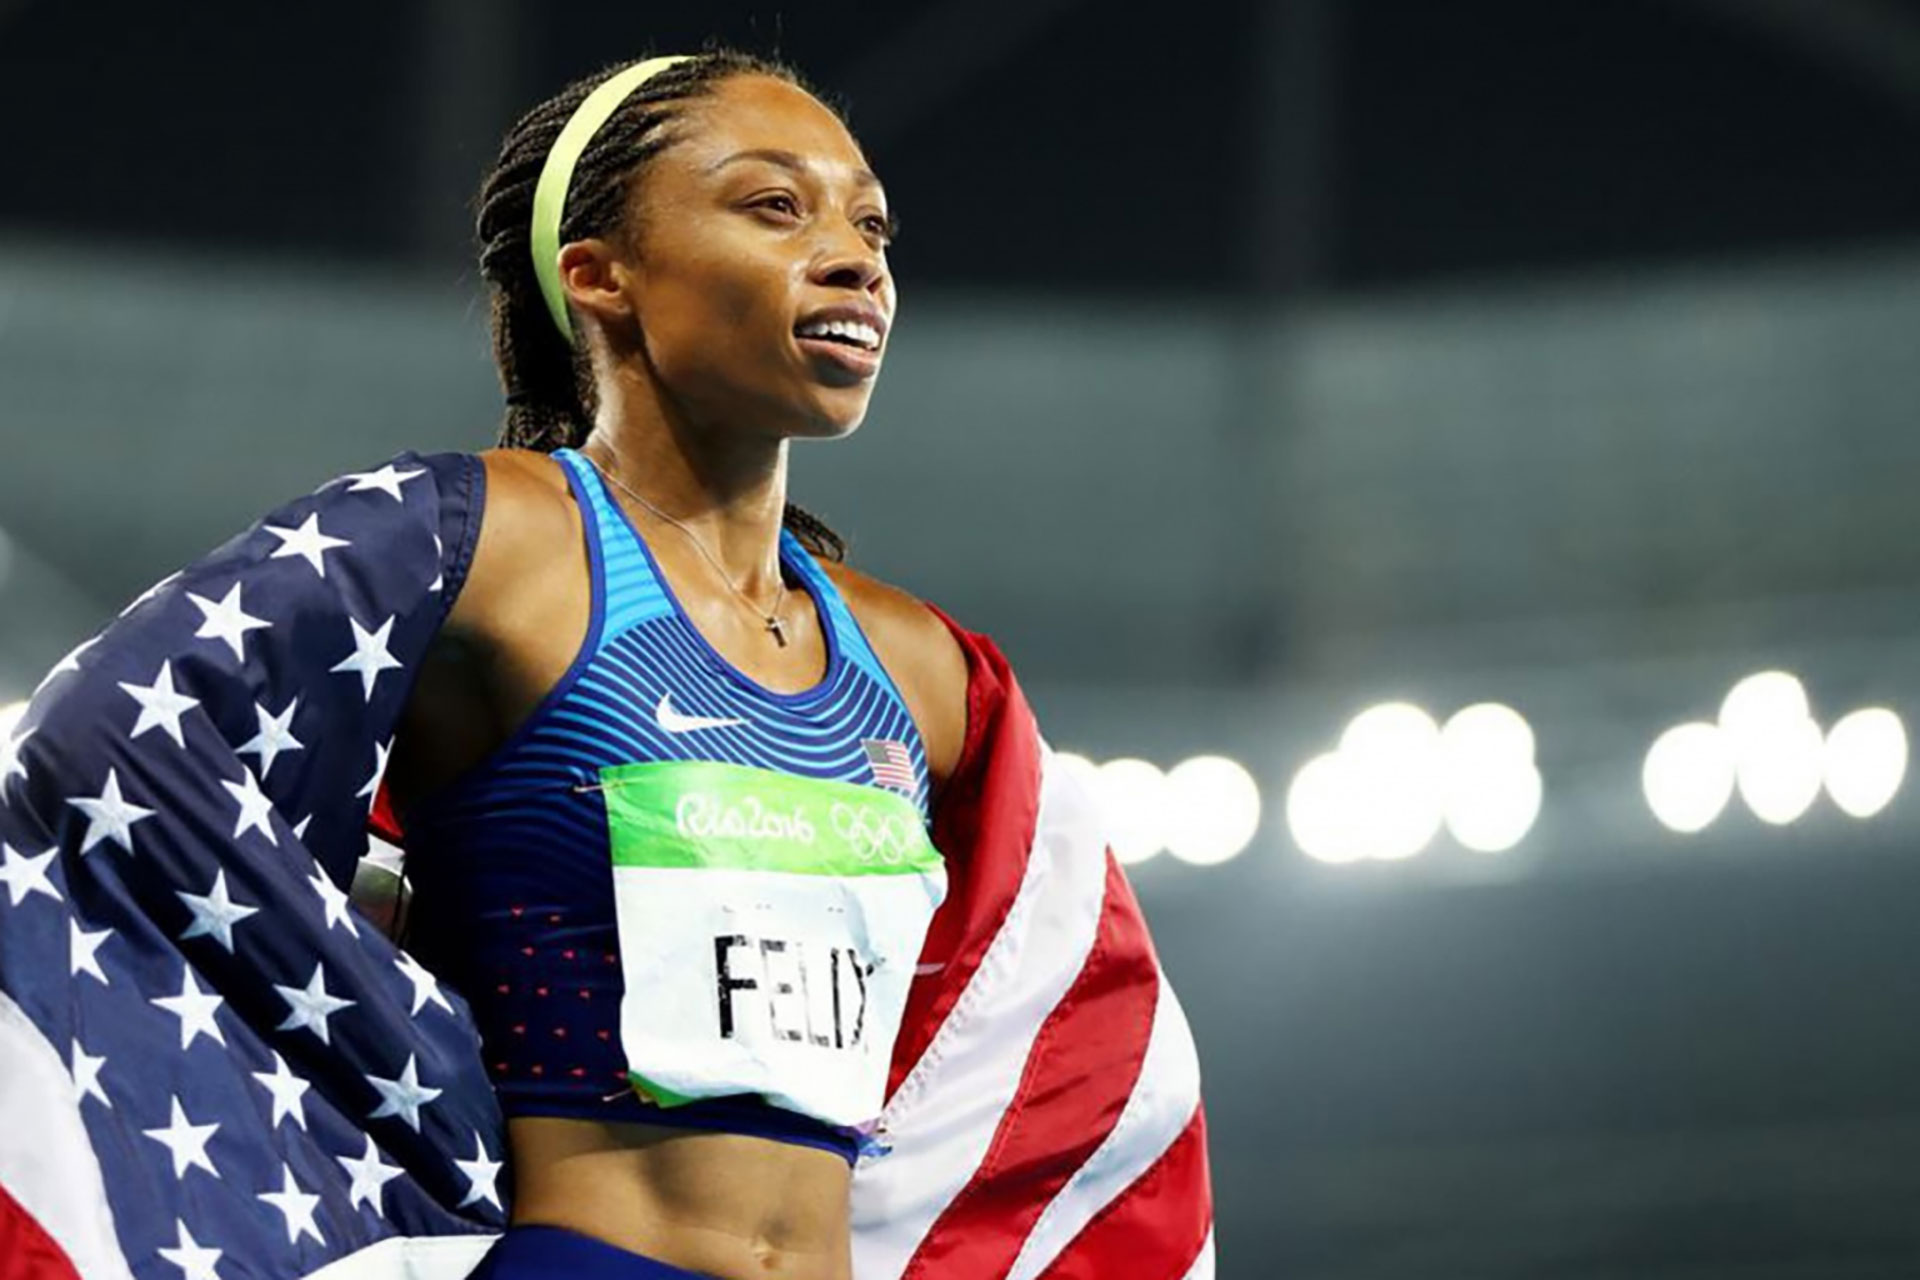 The training regimen that qualified Allyson Felix for the Olympics